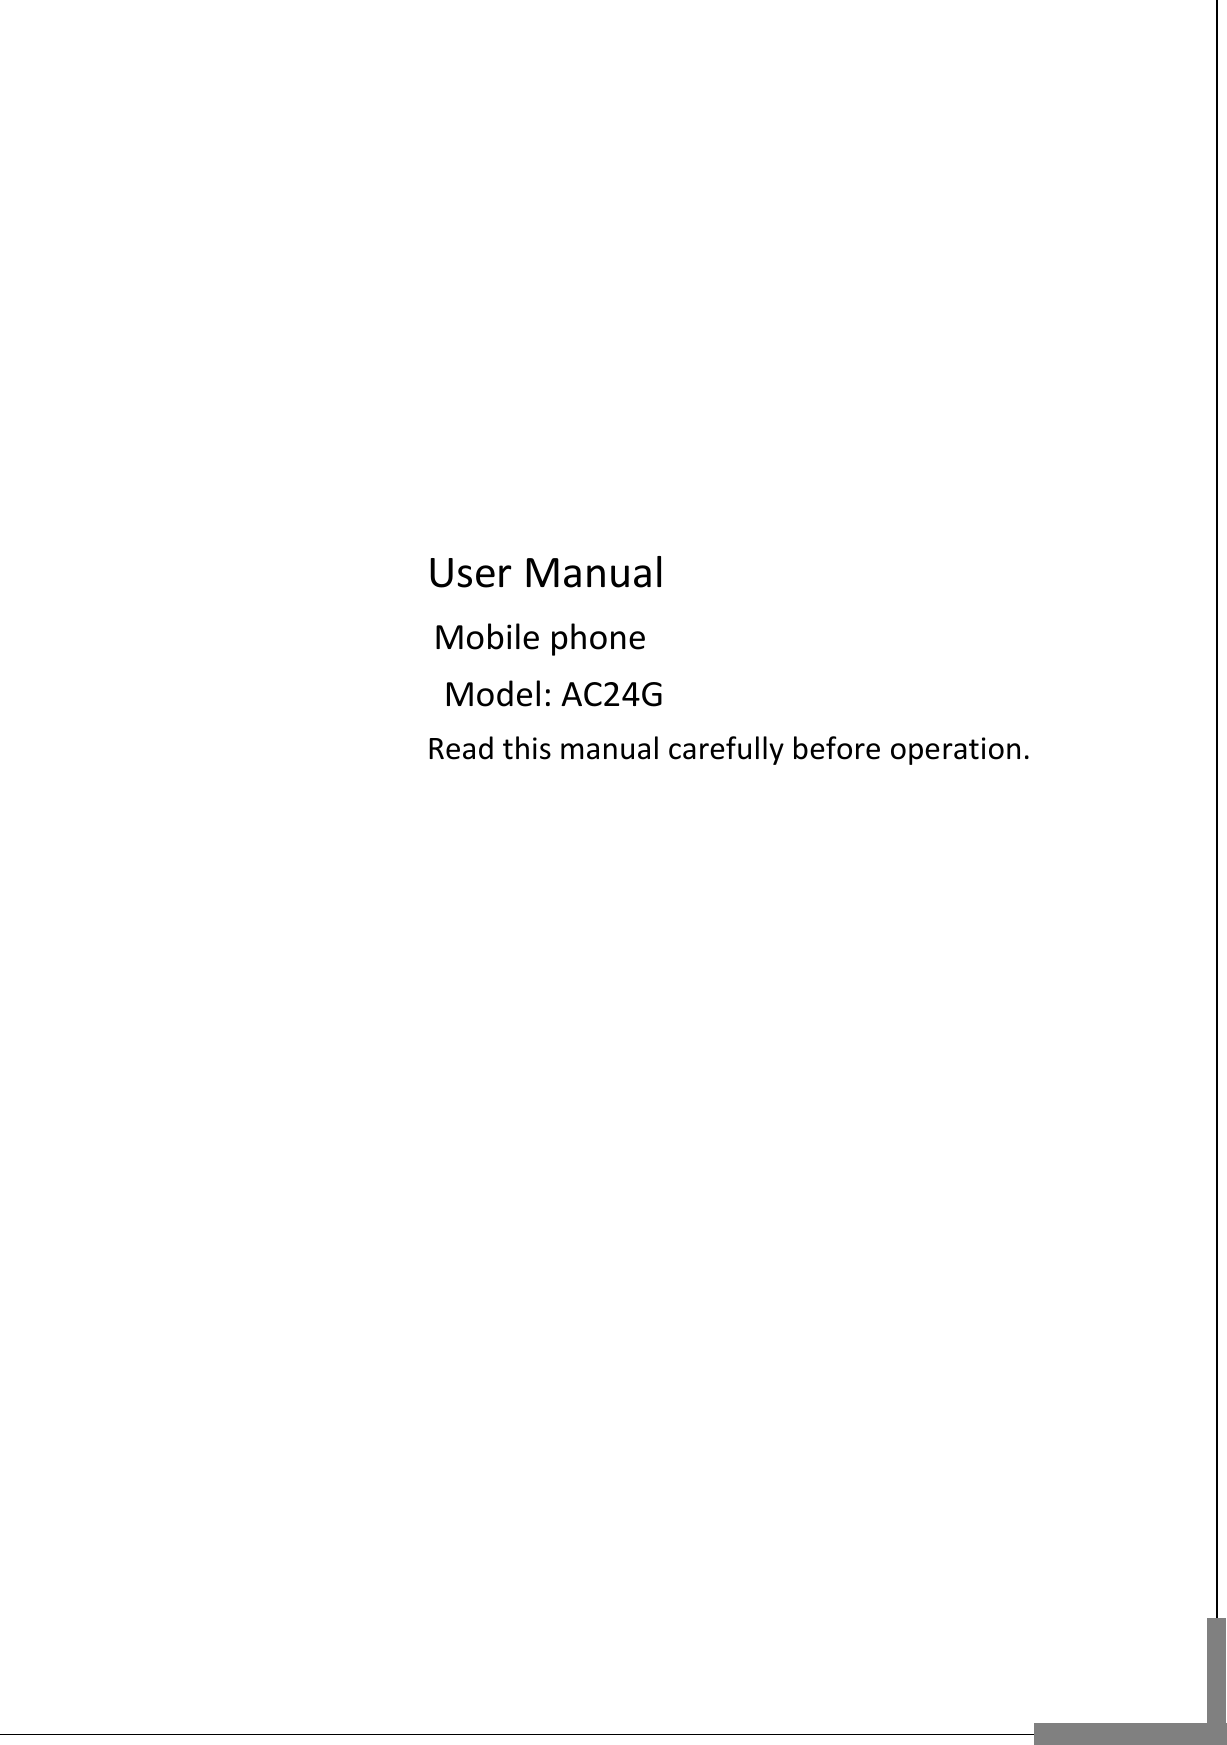                                                        User Manual                                       Mobile phone                       Model: AC24G                      Read this manual carefully before operation.           